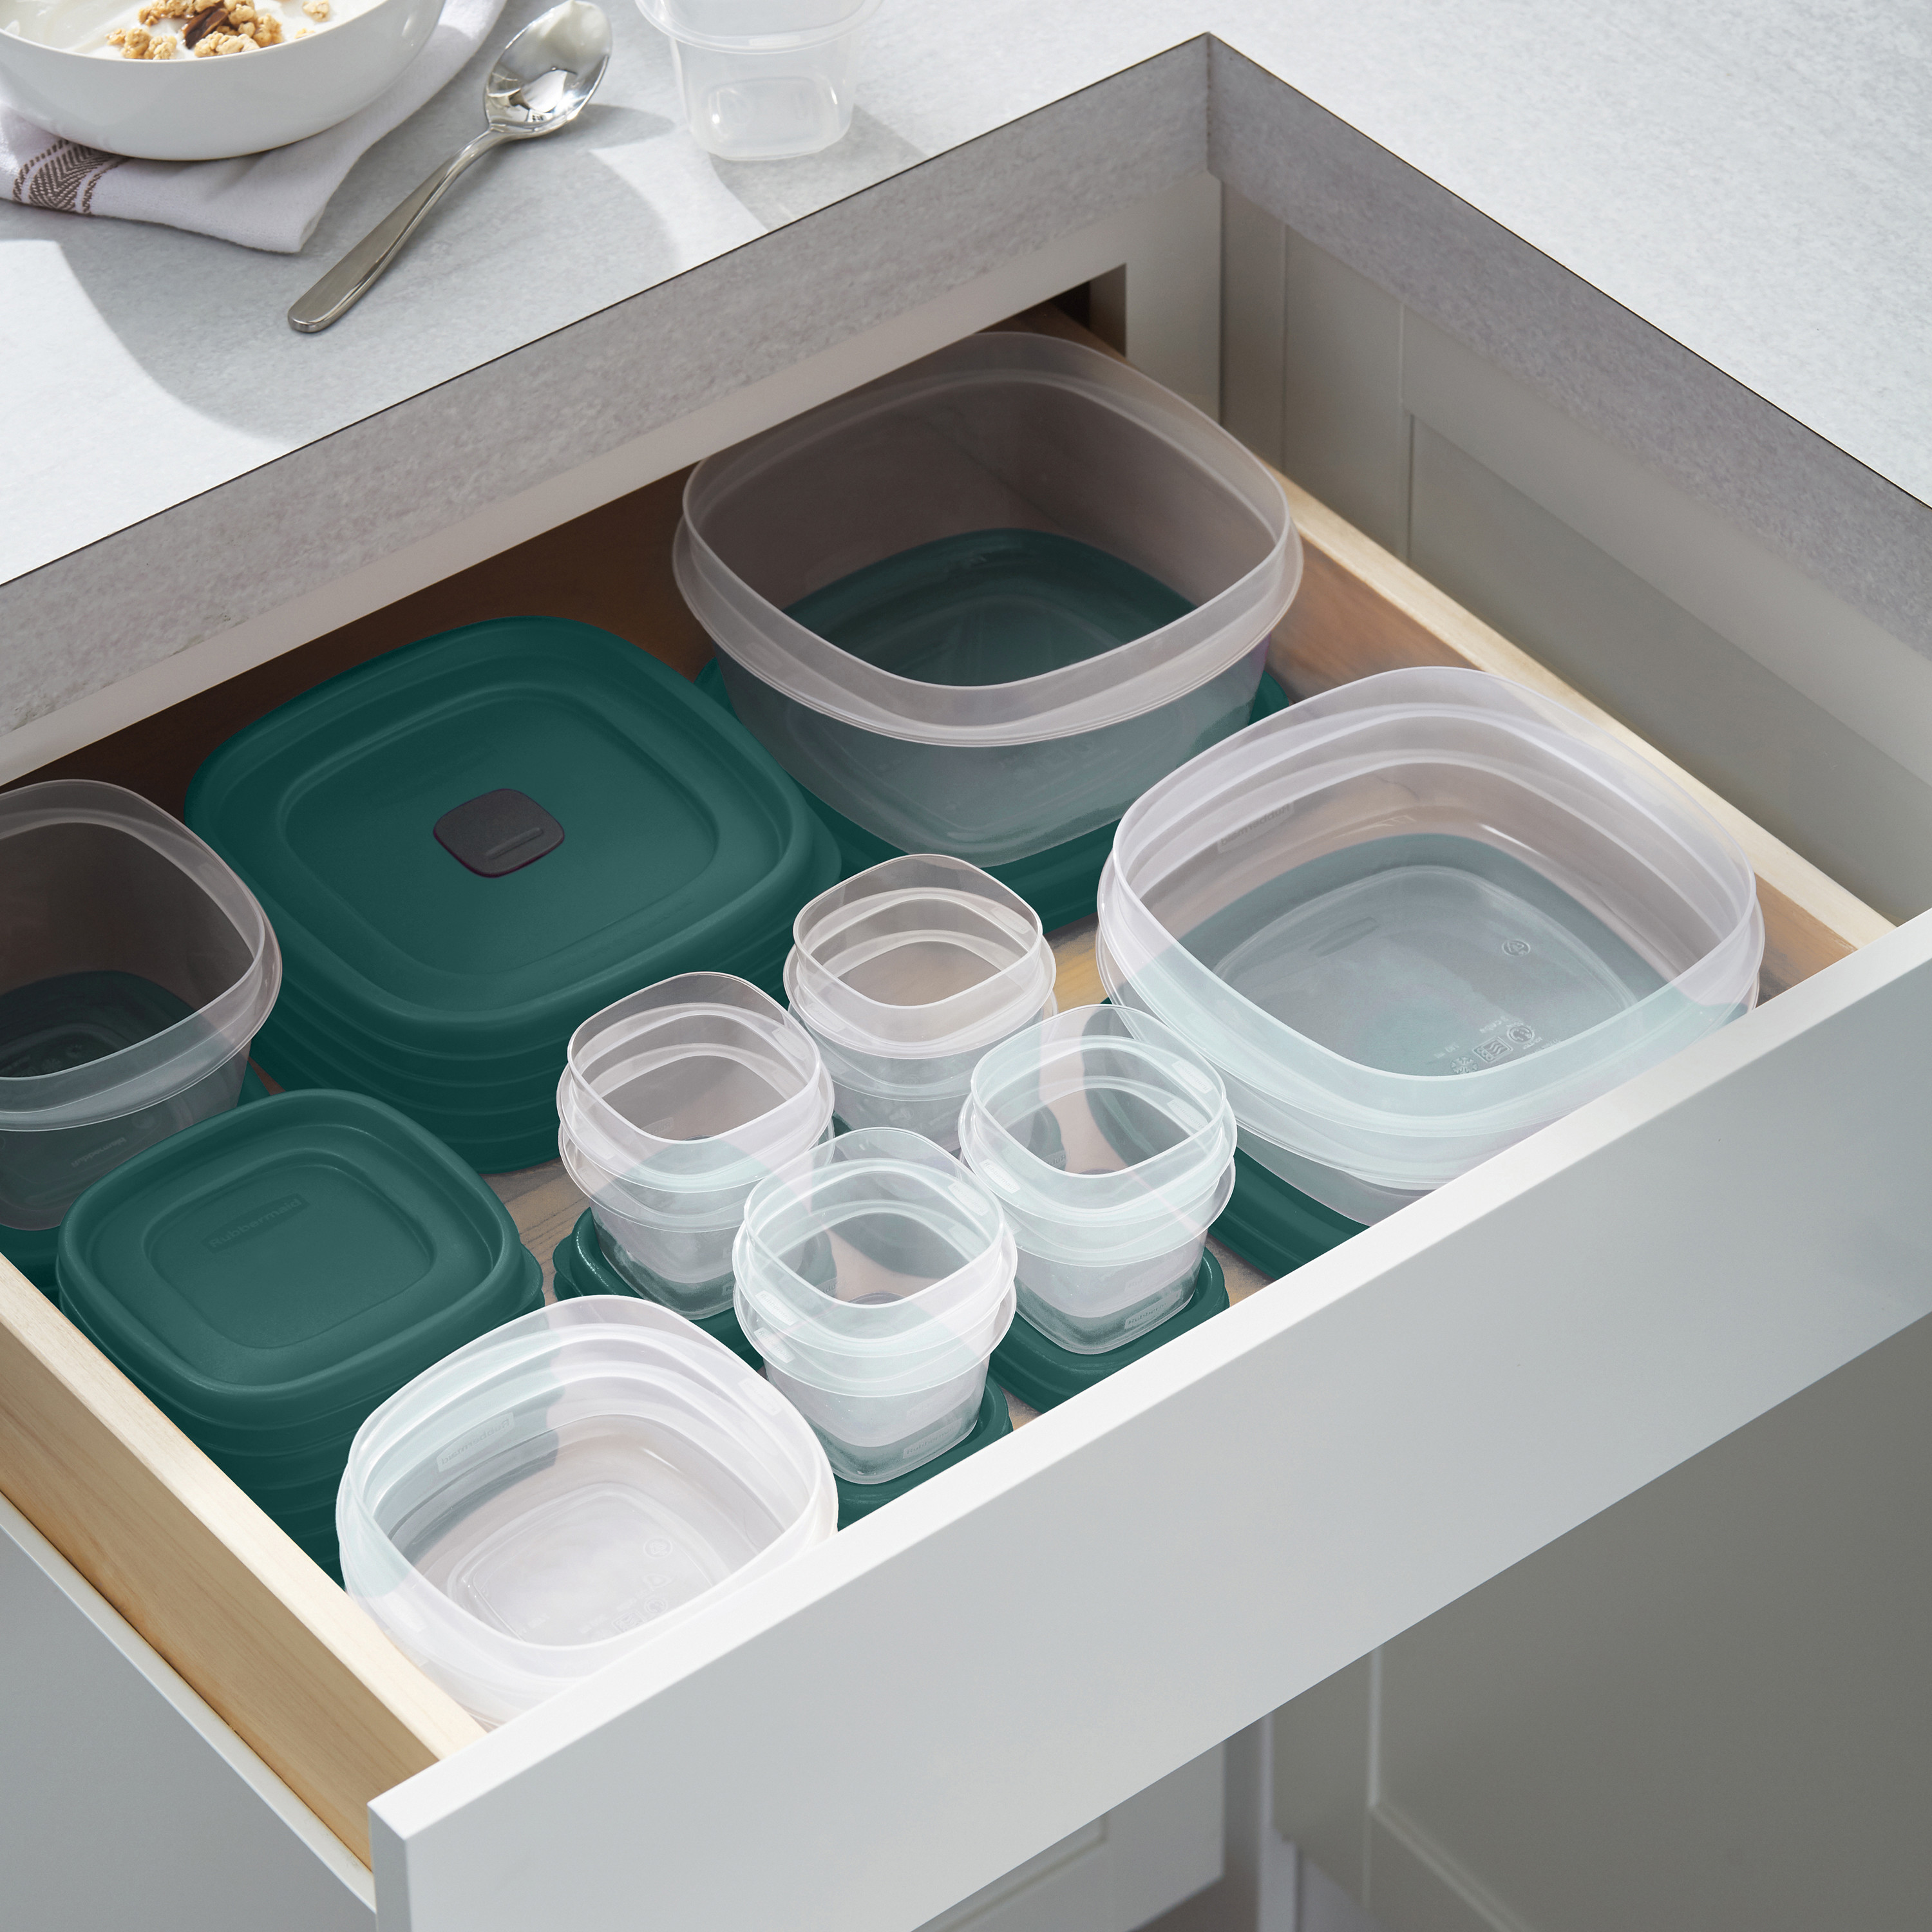 Rubbermaid EasyFindLids 26 Piece Plastic Food Storage Container Set with Vents, (39.5 Cup), Blue Spruce - image 2 of 8